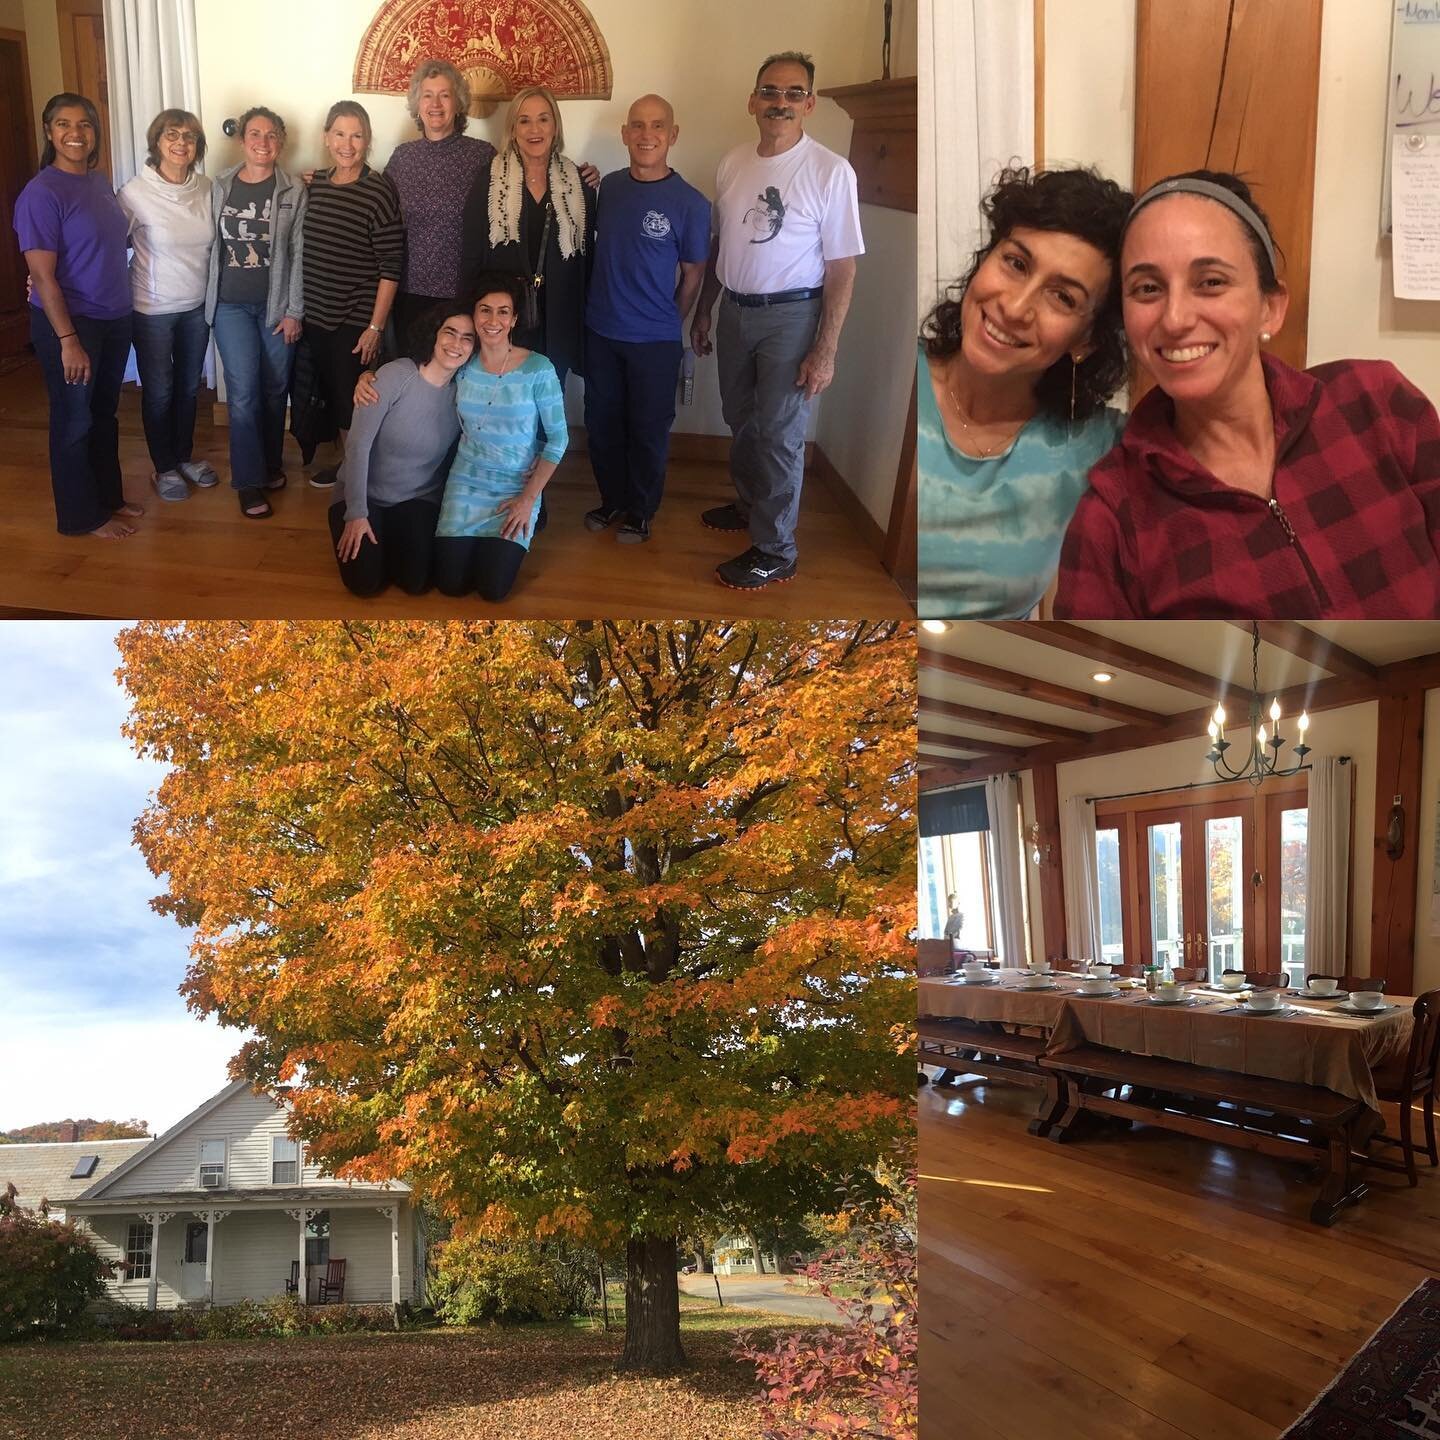 It&rsquo;s a while from now, but time flies. Pls join me and my amazing collaborator in Yoga and friendship, @gloriarodriguezgil for our annual Fall retreat to VT. retreat-2022 - October 14-16th in Brattleboro, VT! Link in Bio